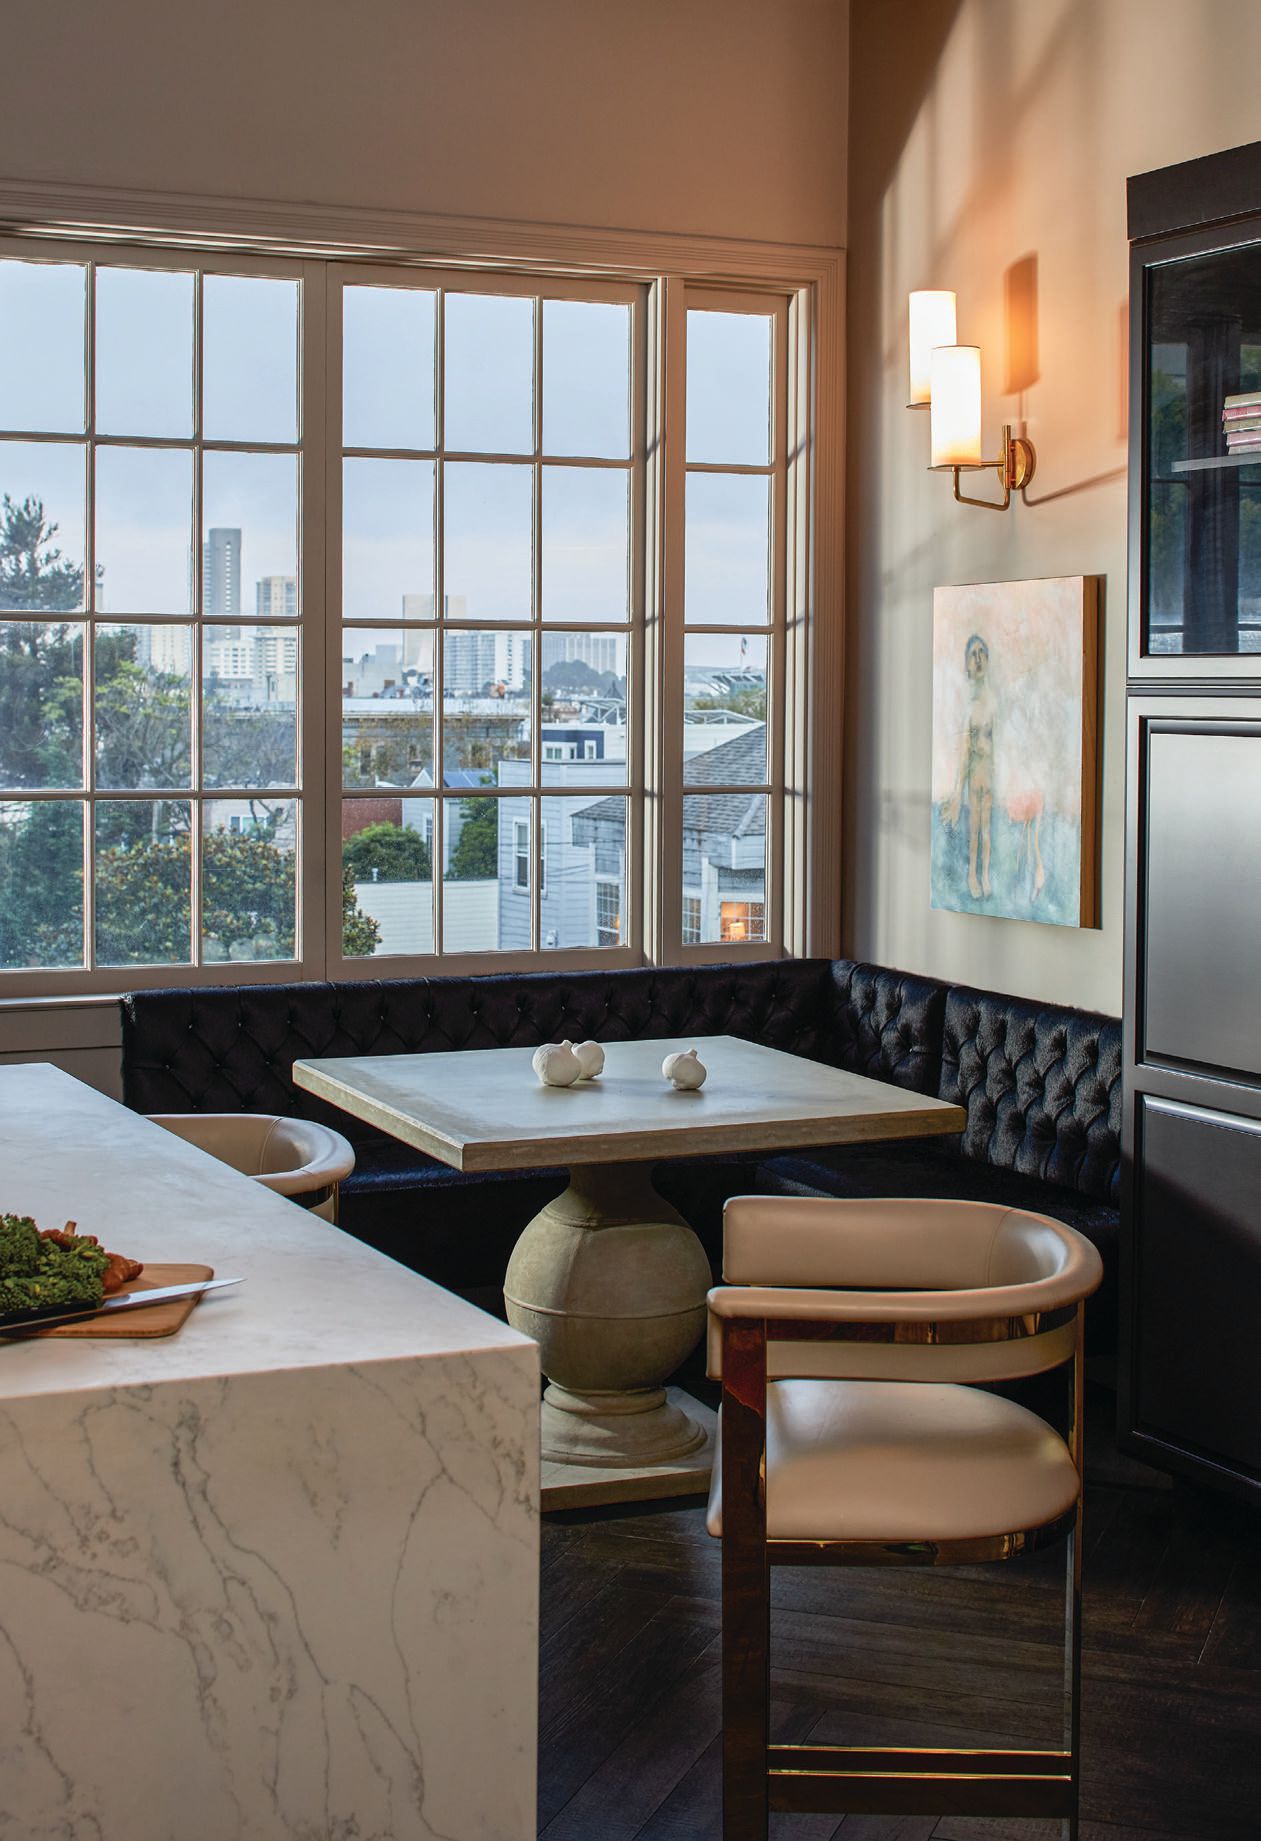 A custom cowhide banquette offers exceptional views of the city. PHOTOGRAPHED BY HELYNN OSPINA